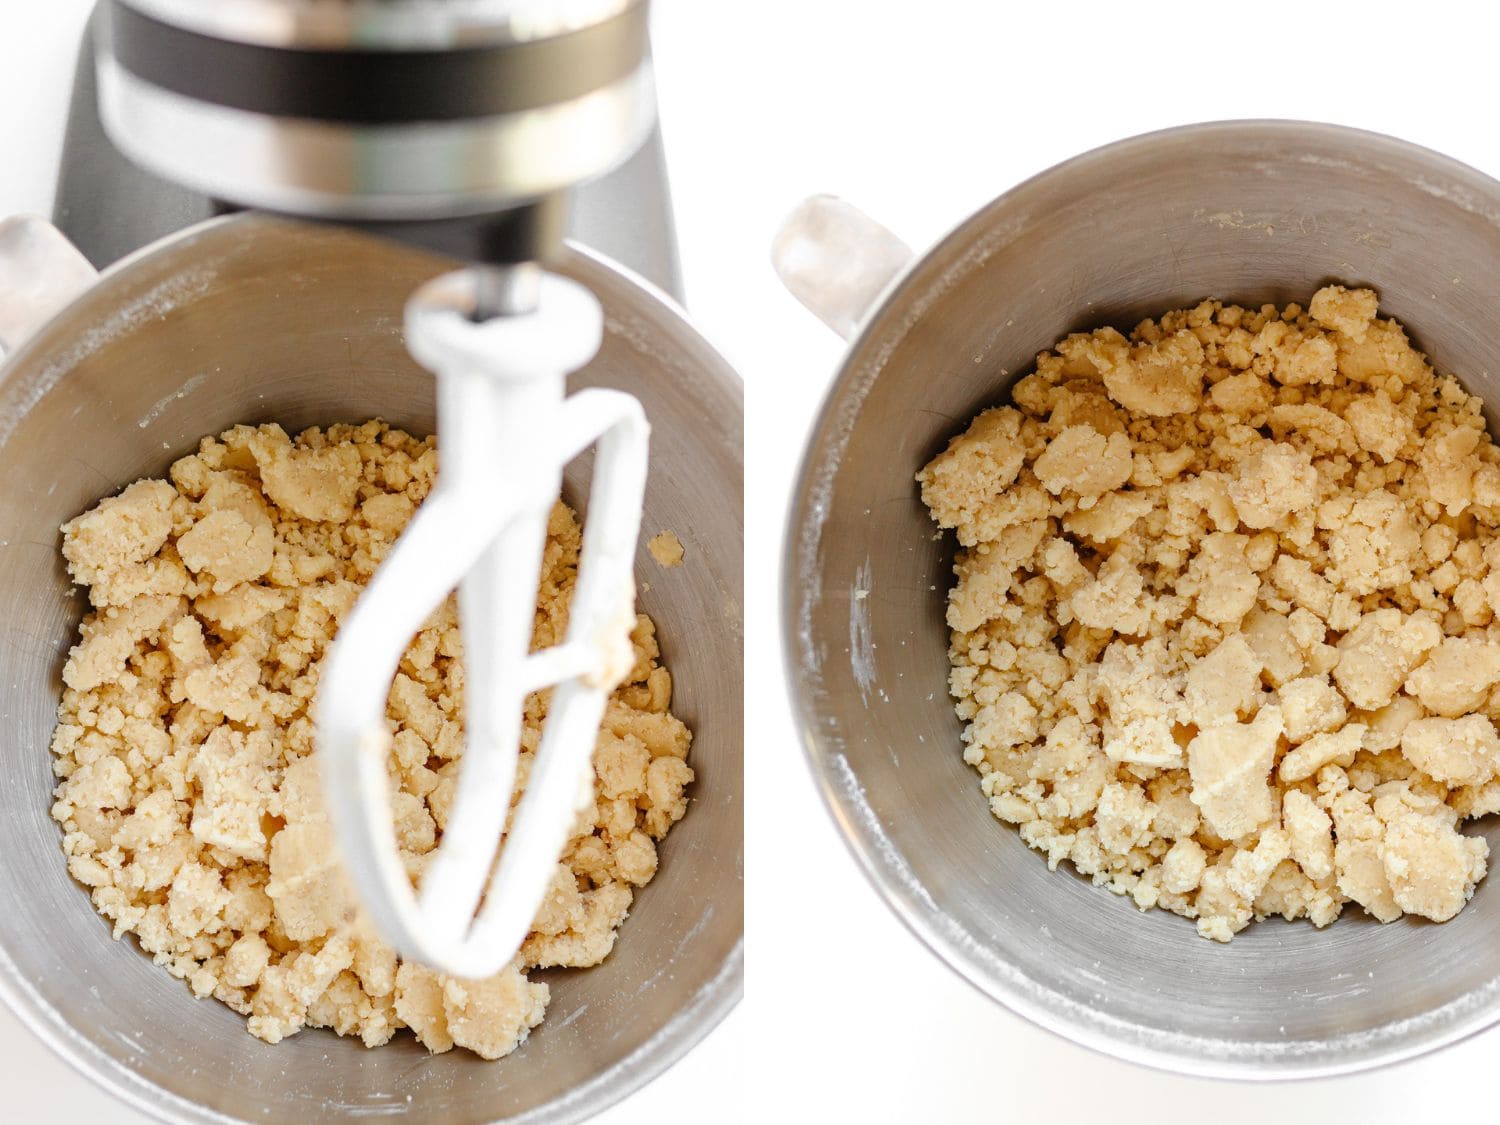 Butter streusel crumble topping being mixed in a stand mixer.